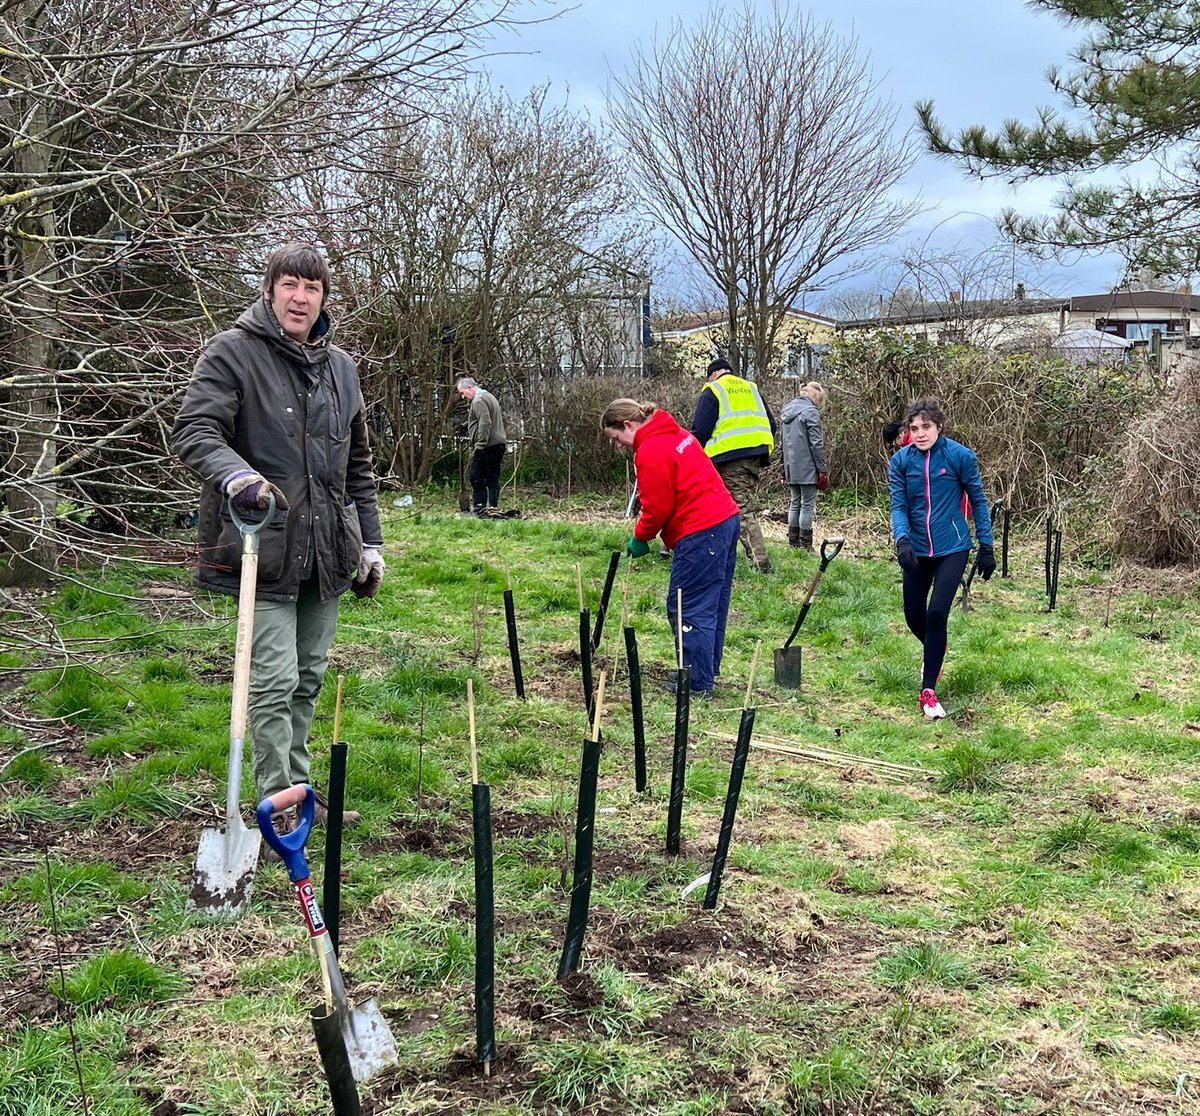 More photos from Eastney Lakes planting on 11 March. A good turnout once again and a very enjoyable occasion.